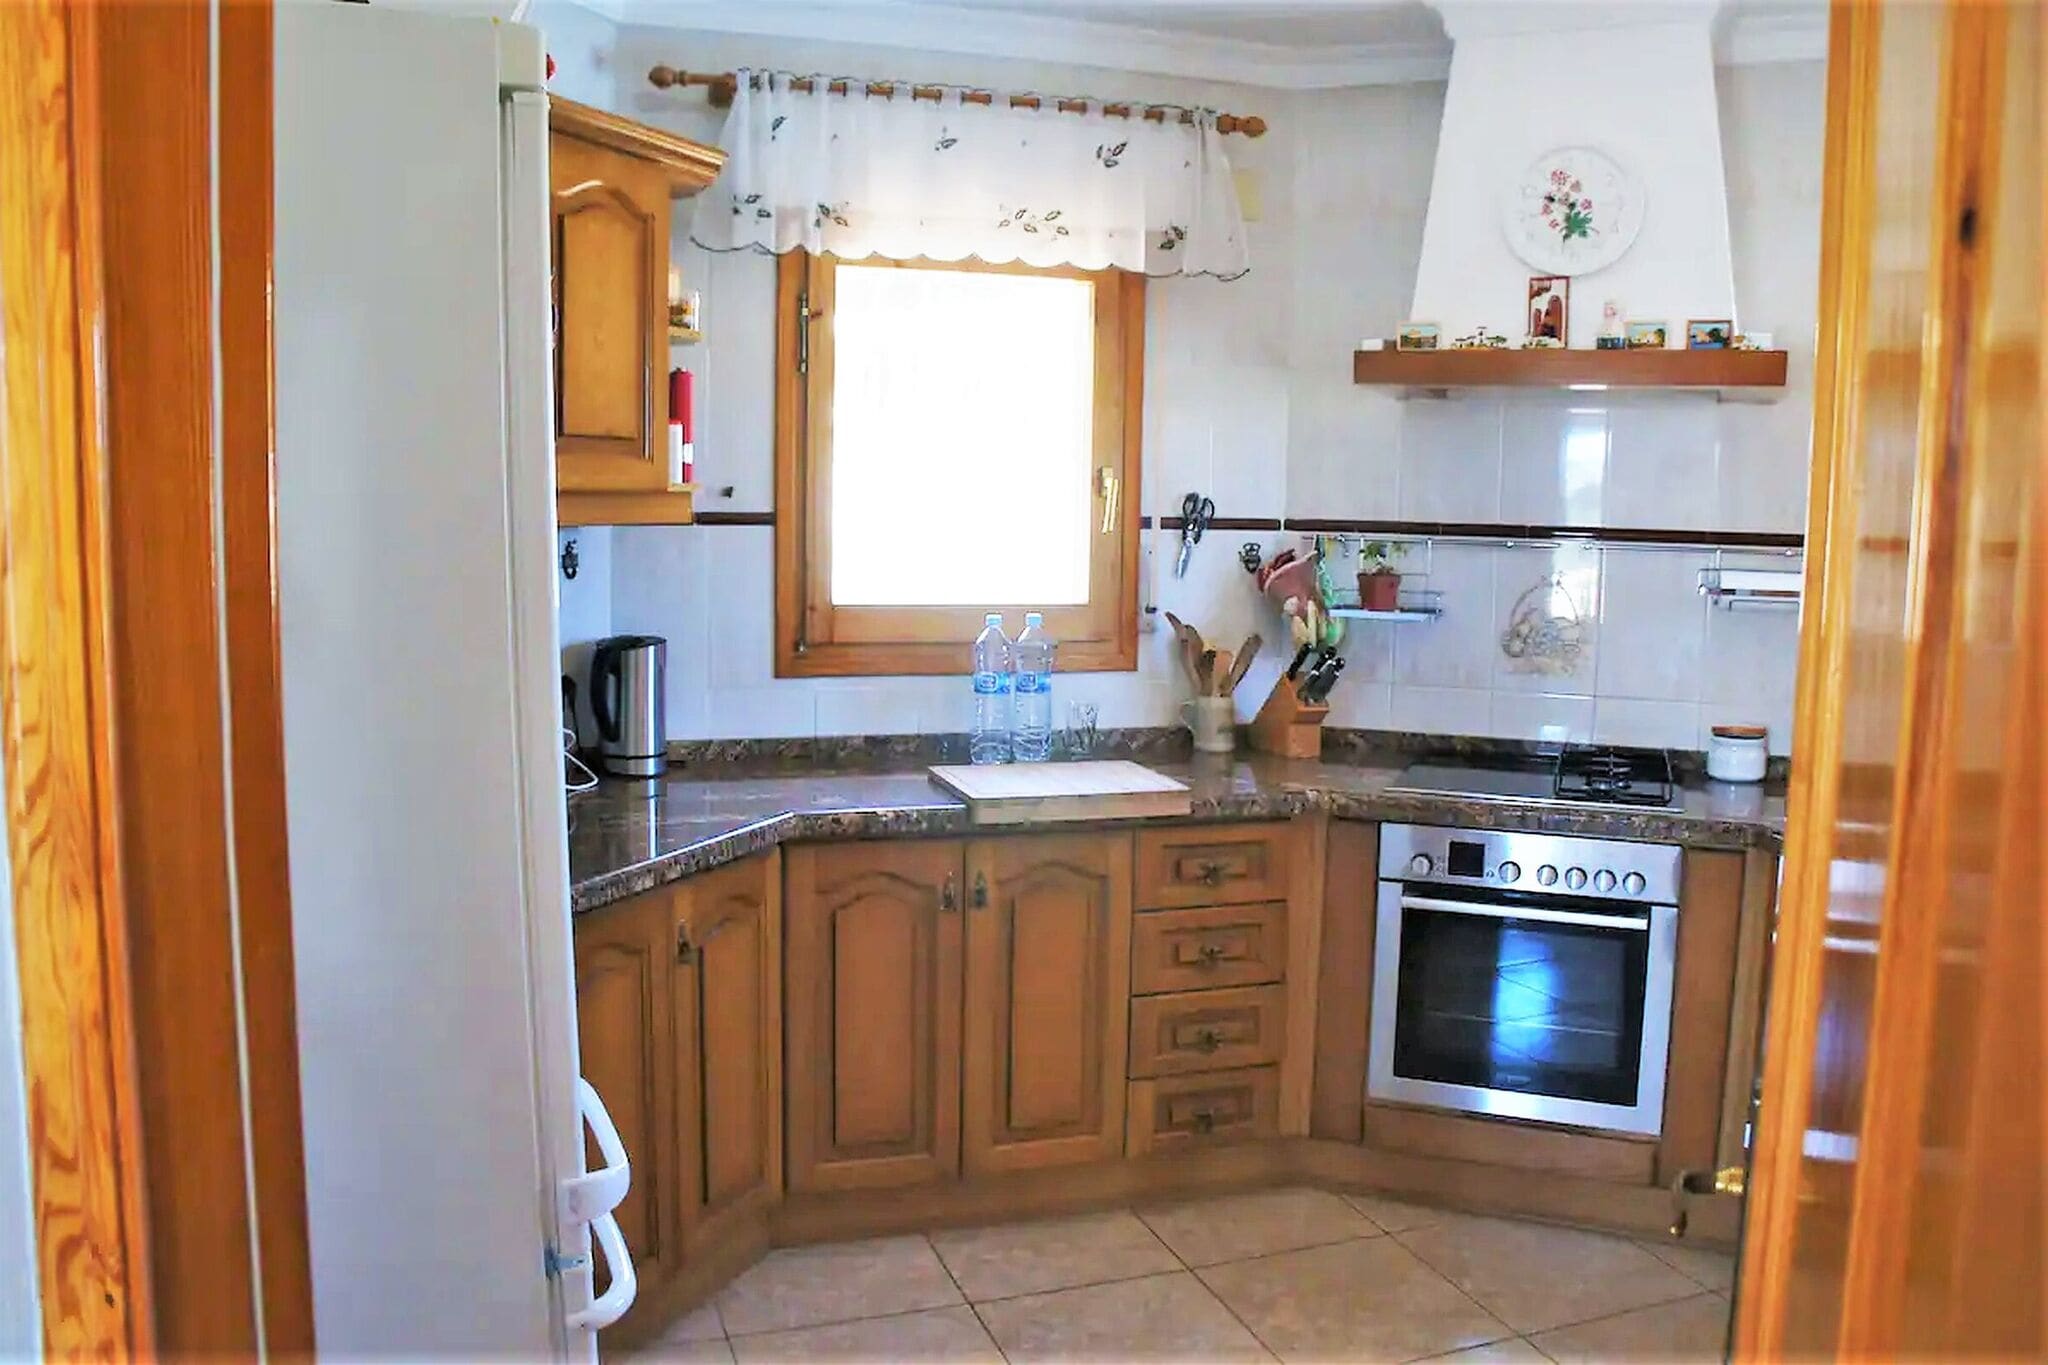 Pleasant holiday home in Denia with private pool